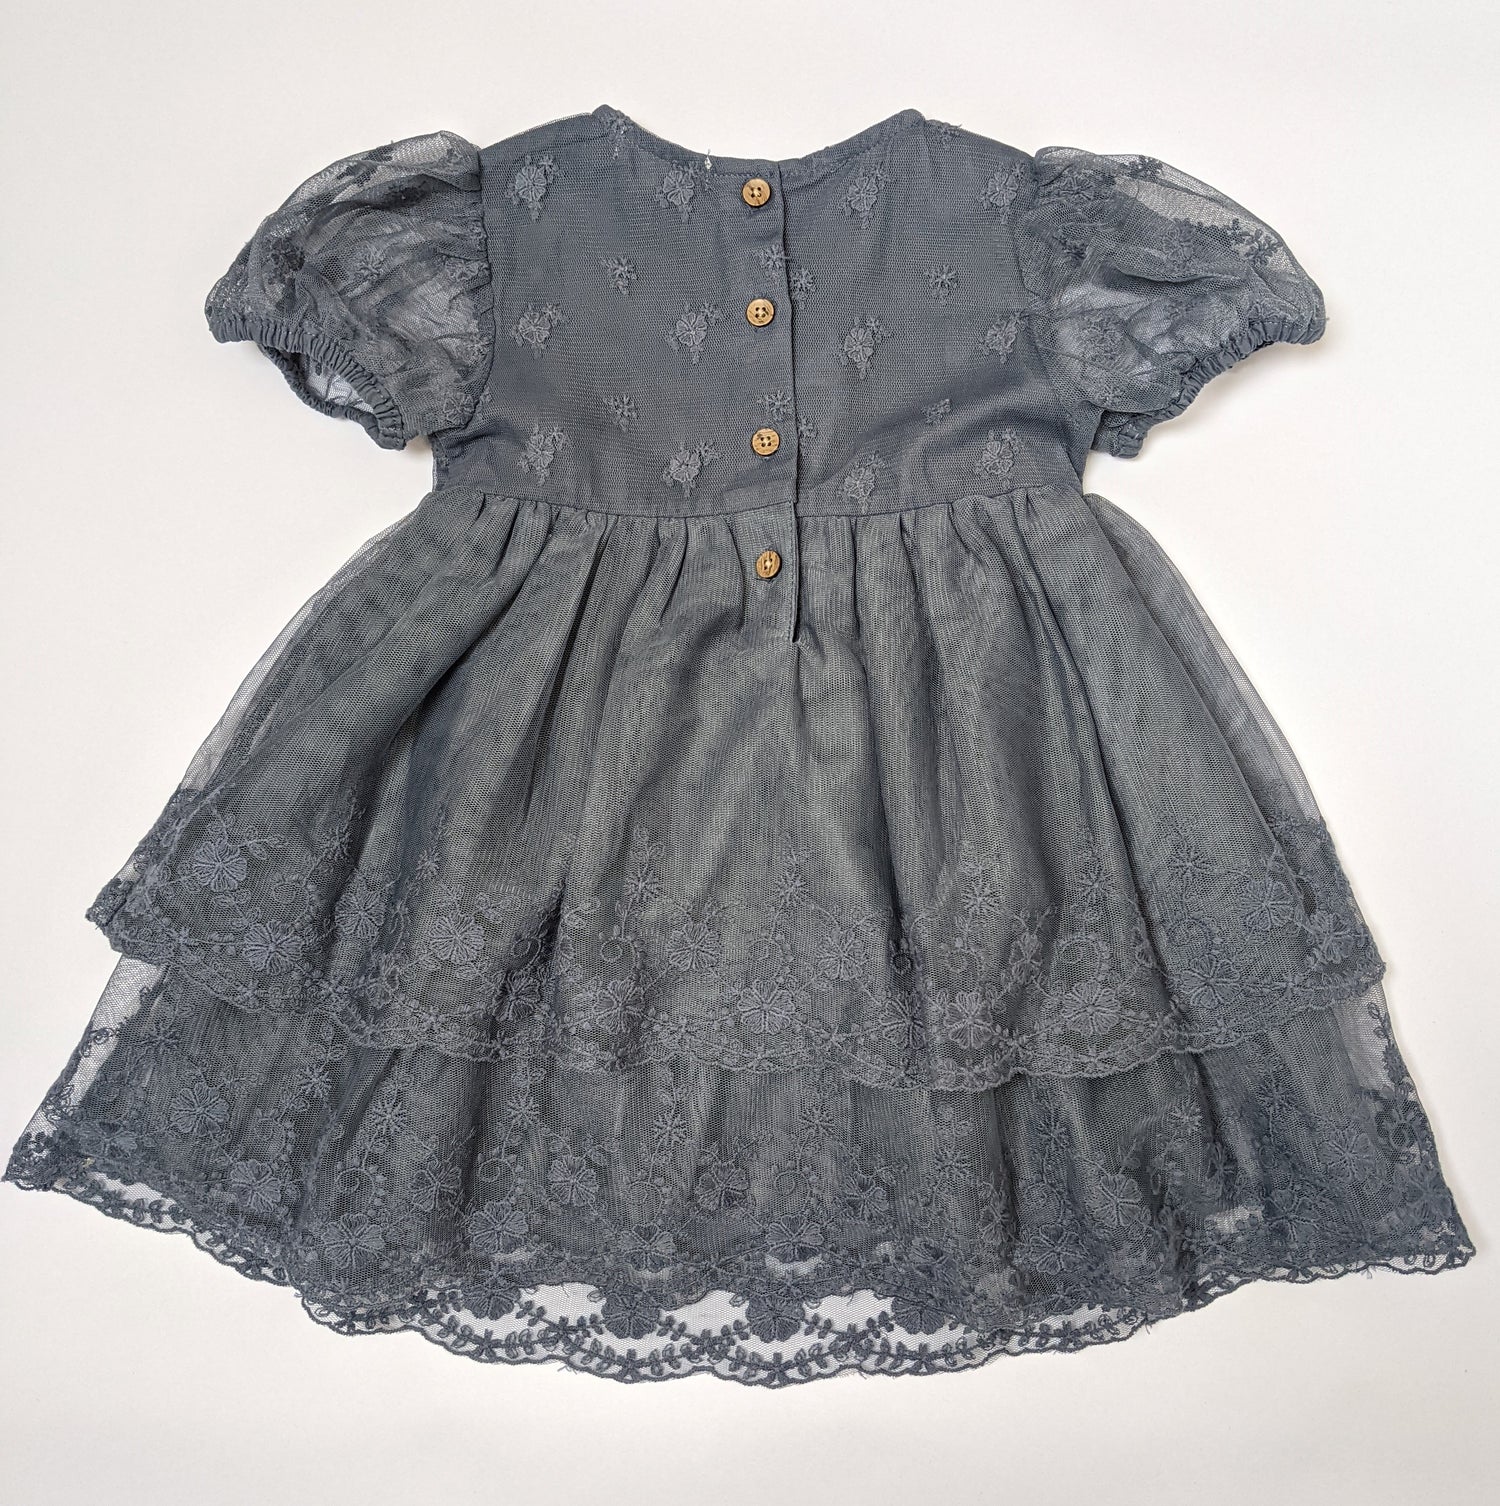 Back of blue lace dress showing wood imitation buttons